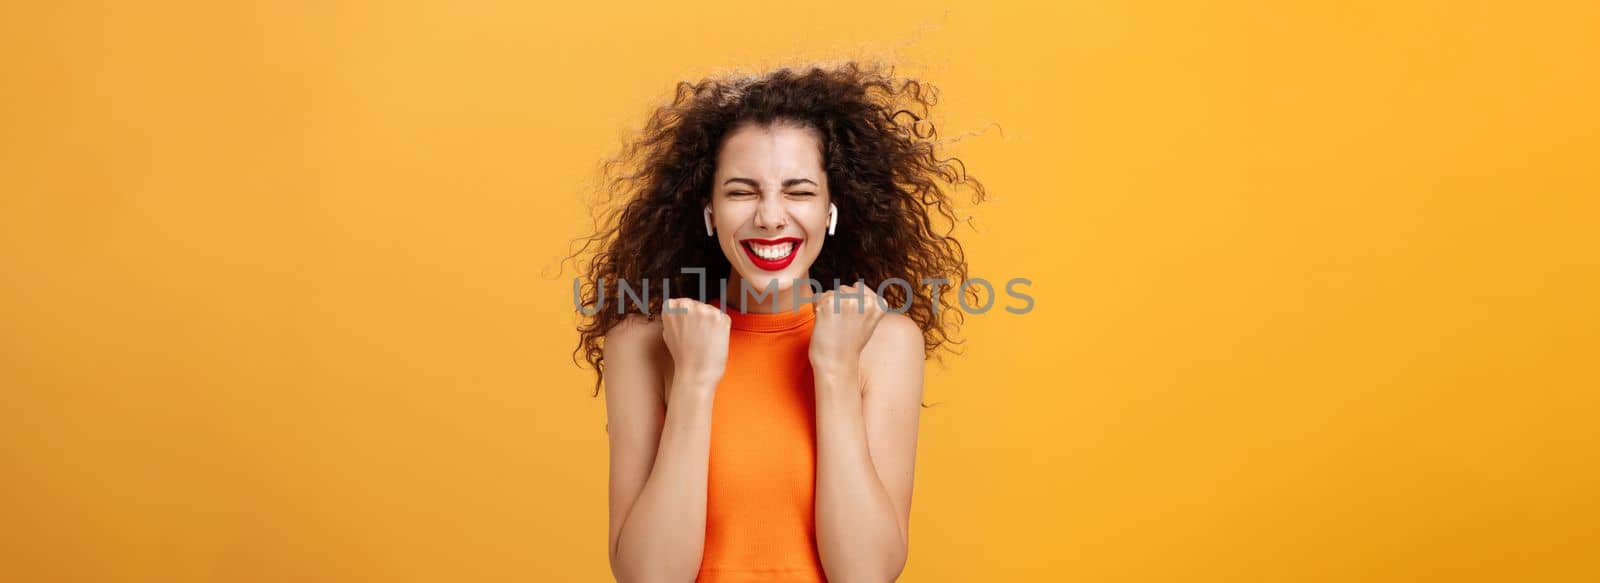 Pleased happy and triumphing curly-haired female in cropped top clenching fists in yes gesture closing eyes and smiling broadly receiving awesome news, winning award over orange background. Copy space